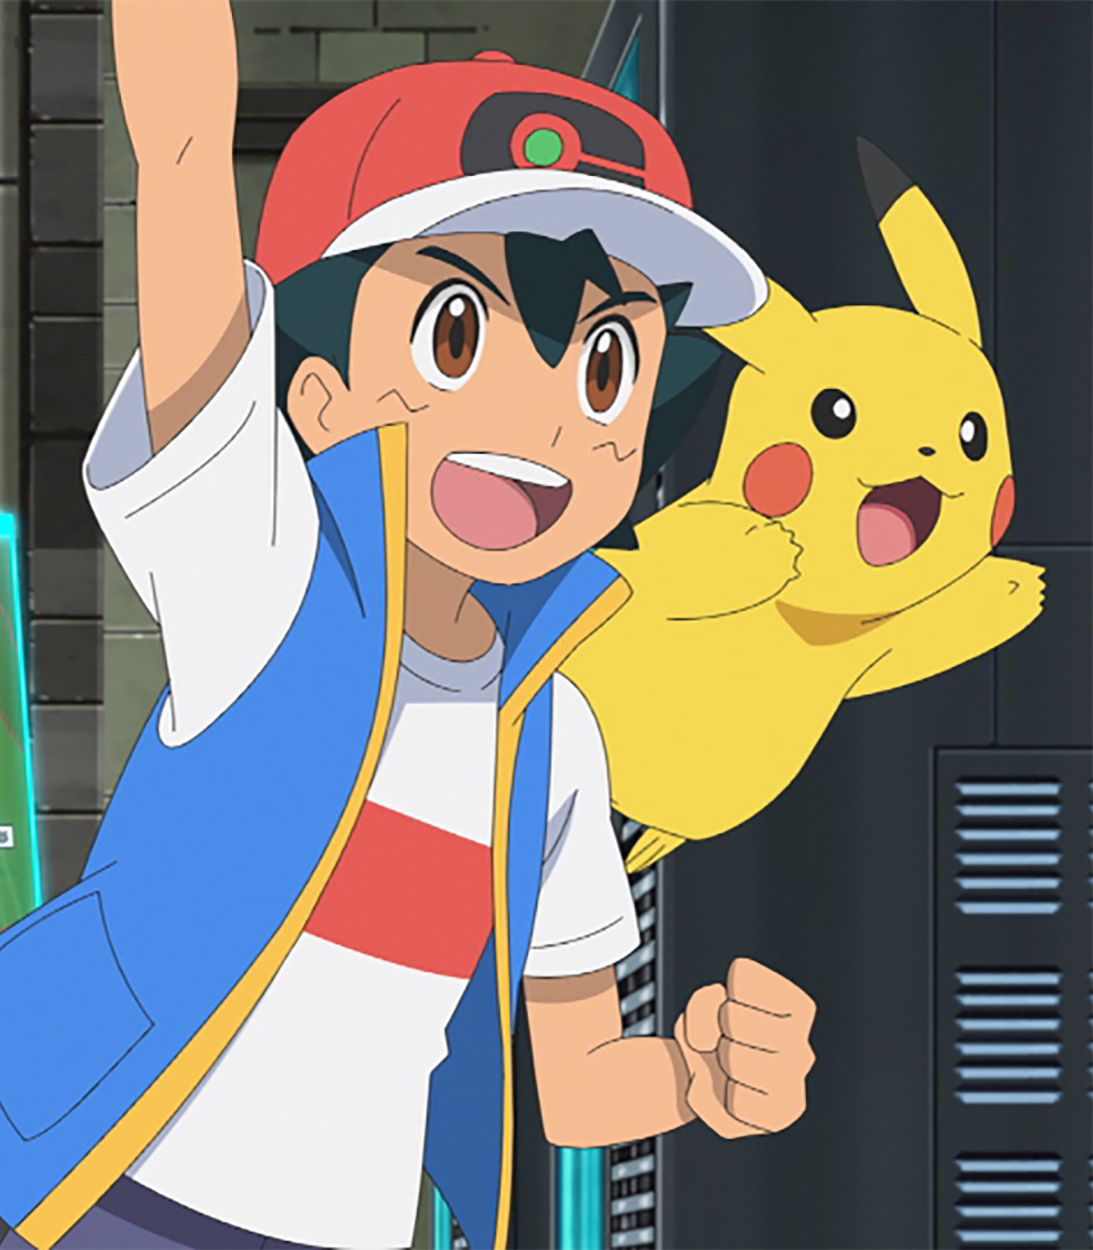 Ash Ketchum and Pikachu in Pokémon Master Journeys: The Series